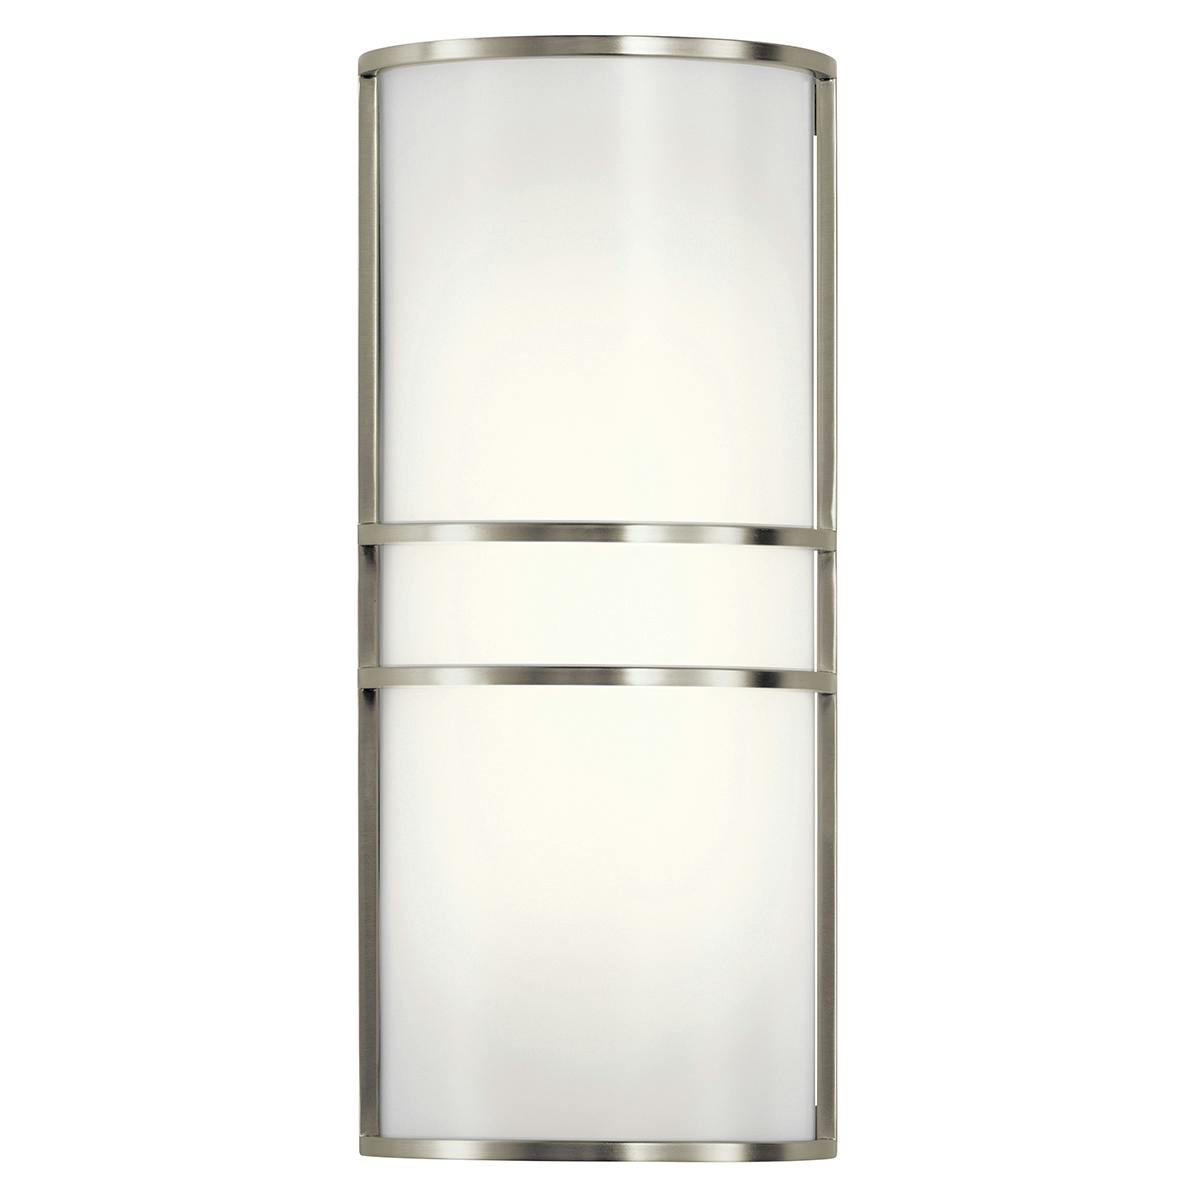 2 Light LED Wall Sconce Brushed Nickel on a white background